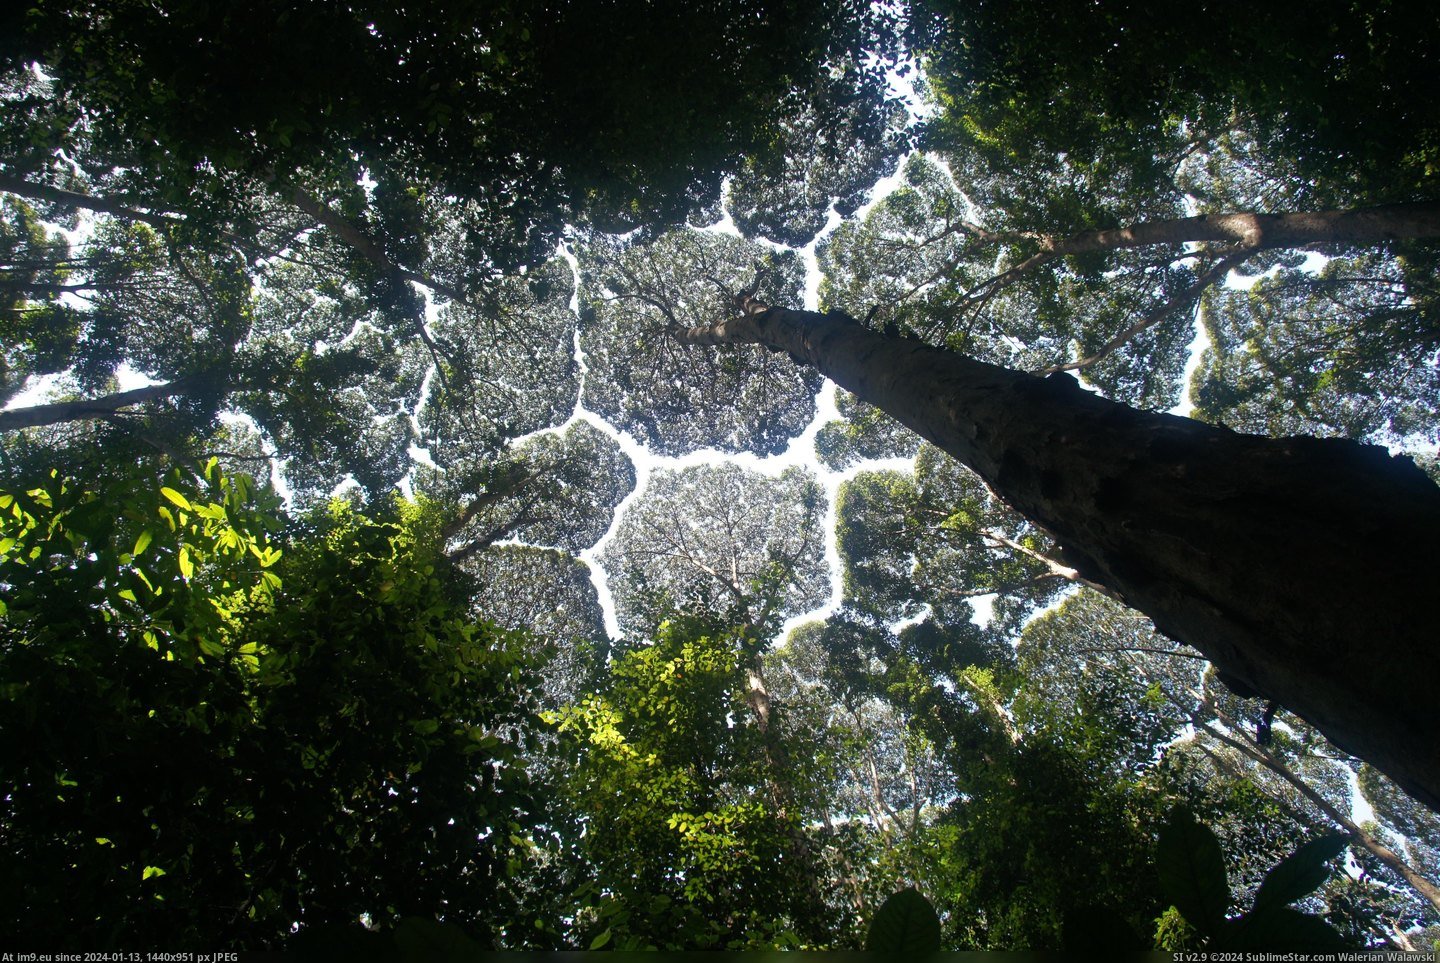 #Natural #Called #Touch #Phenomenon #Shyness #Trees #Crown #Eachother [Pics] The canopies of these trees don't ever touch eachother, it's a natural phenomenon called 'crown shyness'. Pic. (Image of album My r/PICS favs))